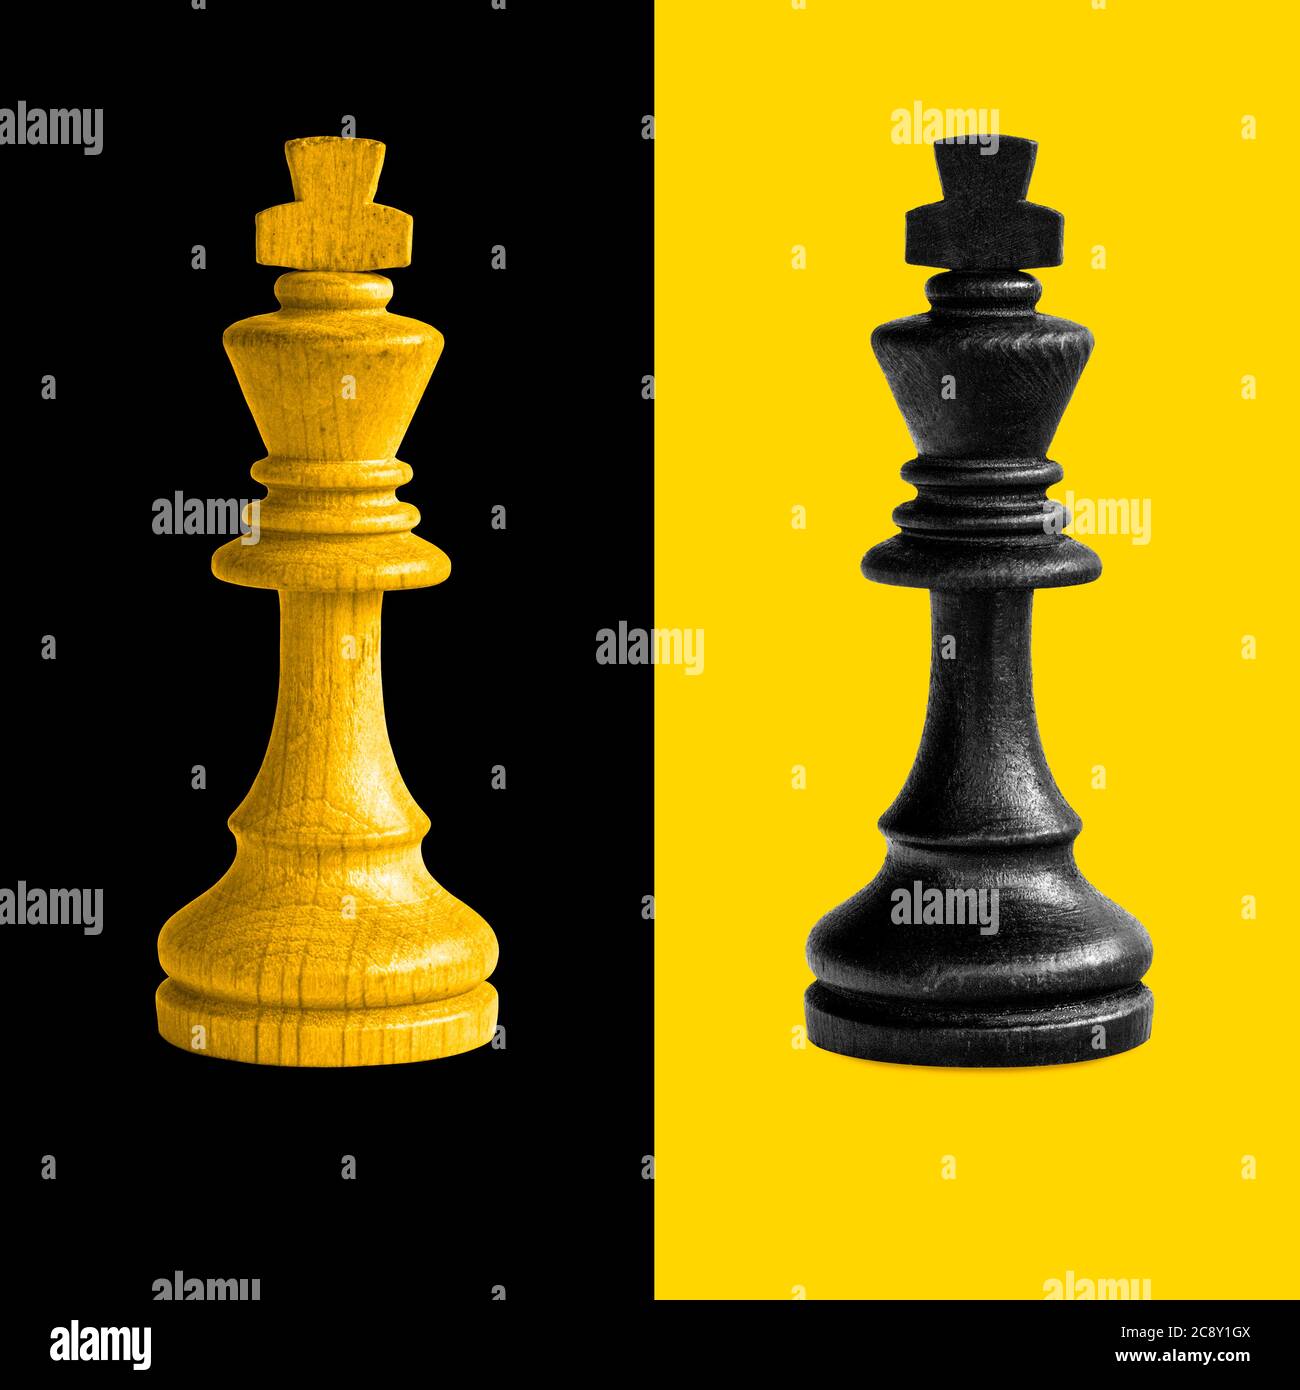 Pair of king chess pieces confronted as opposites in black and yellow background. Stock Photo